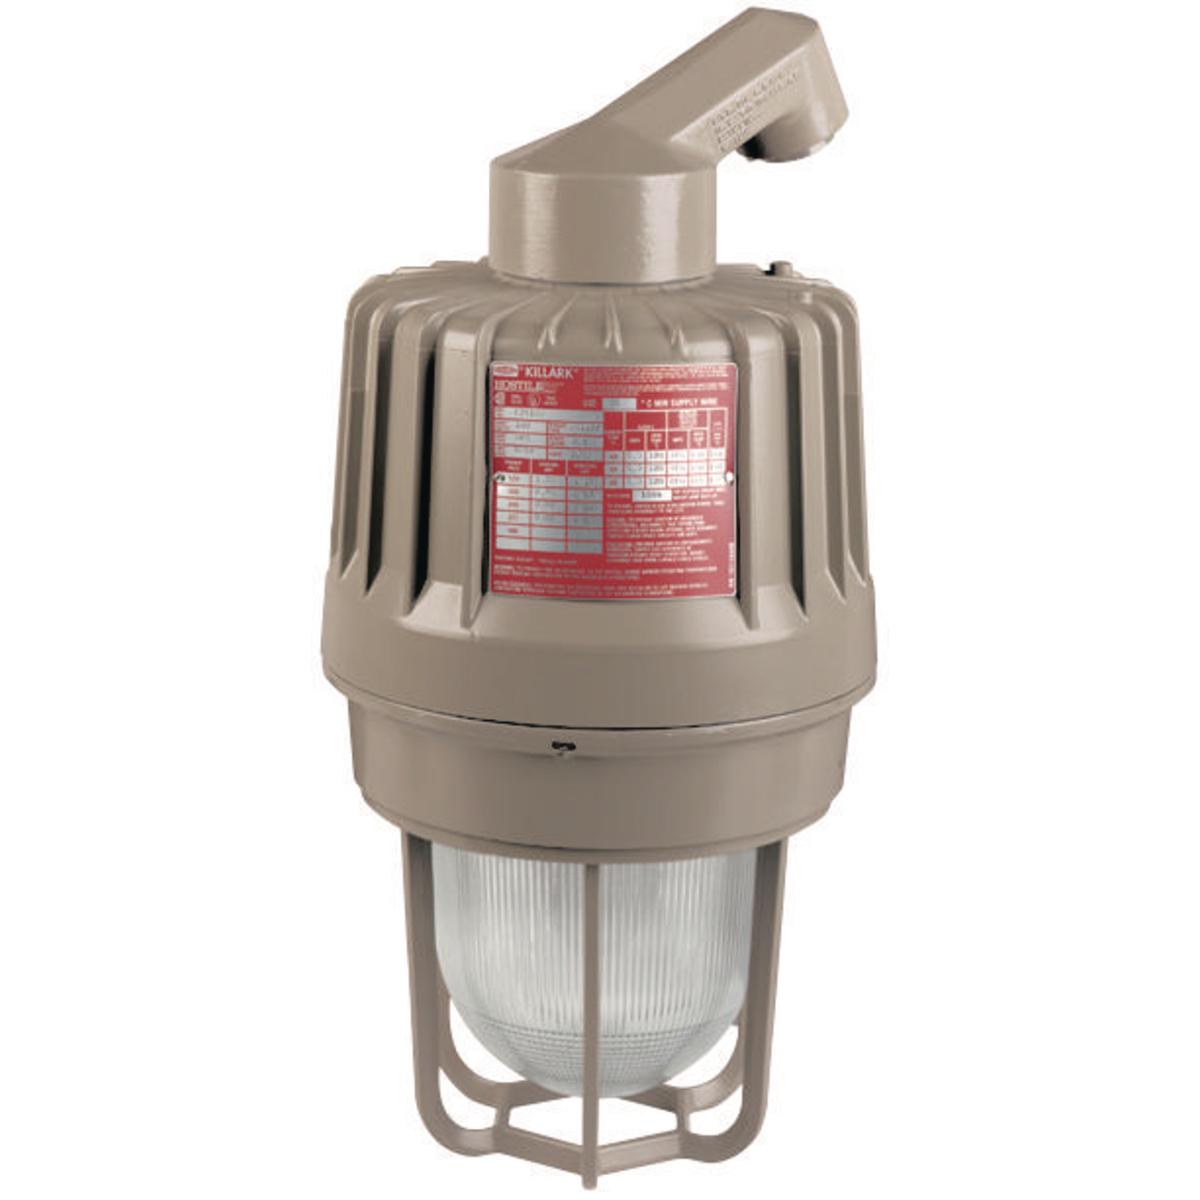 Hubbell EZP170D4 175W Quadri-Volt Metal Halide 1-1/4" Stanchion Mount  ; Three light sources – High Pressure Sodium (50-400W), Metal Halide (70-400W) and Pulse Start Metal Halide (175-400W) ; Mounting choice –Pendant, ceiling, 25˚ stanchion or 90˚ wall mount, all with “wi